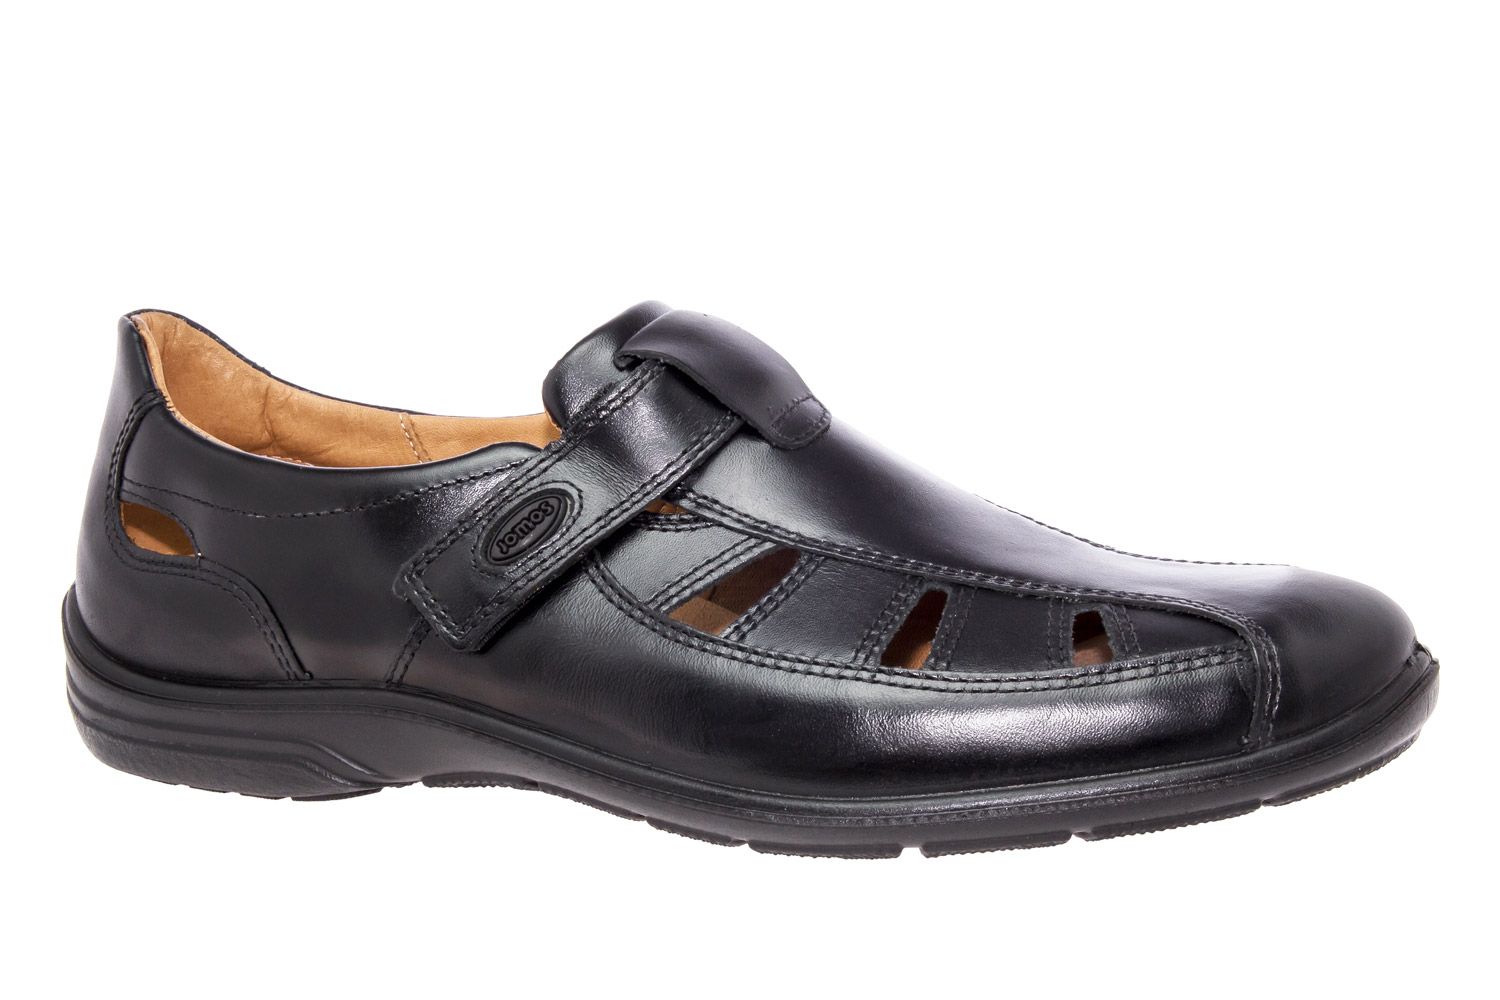 Mens Brown Leather Shoes with velcro closure - Men, Large Sizes, Men ...